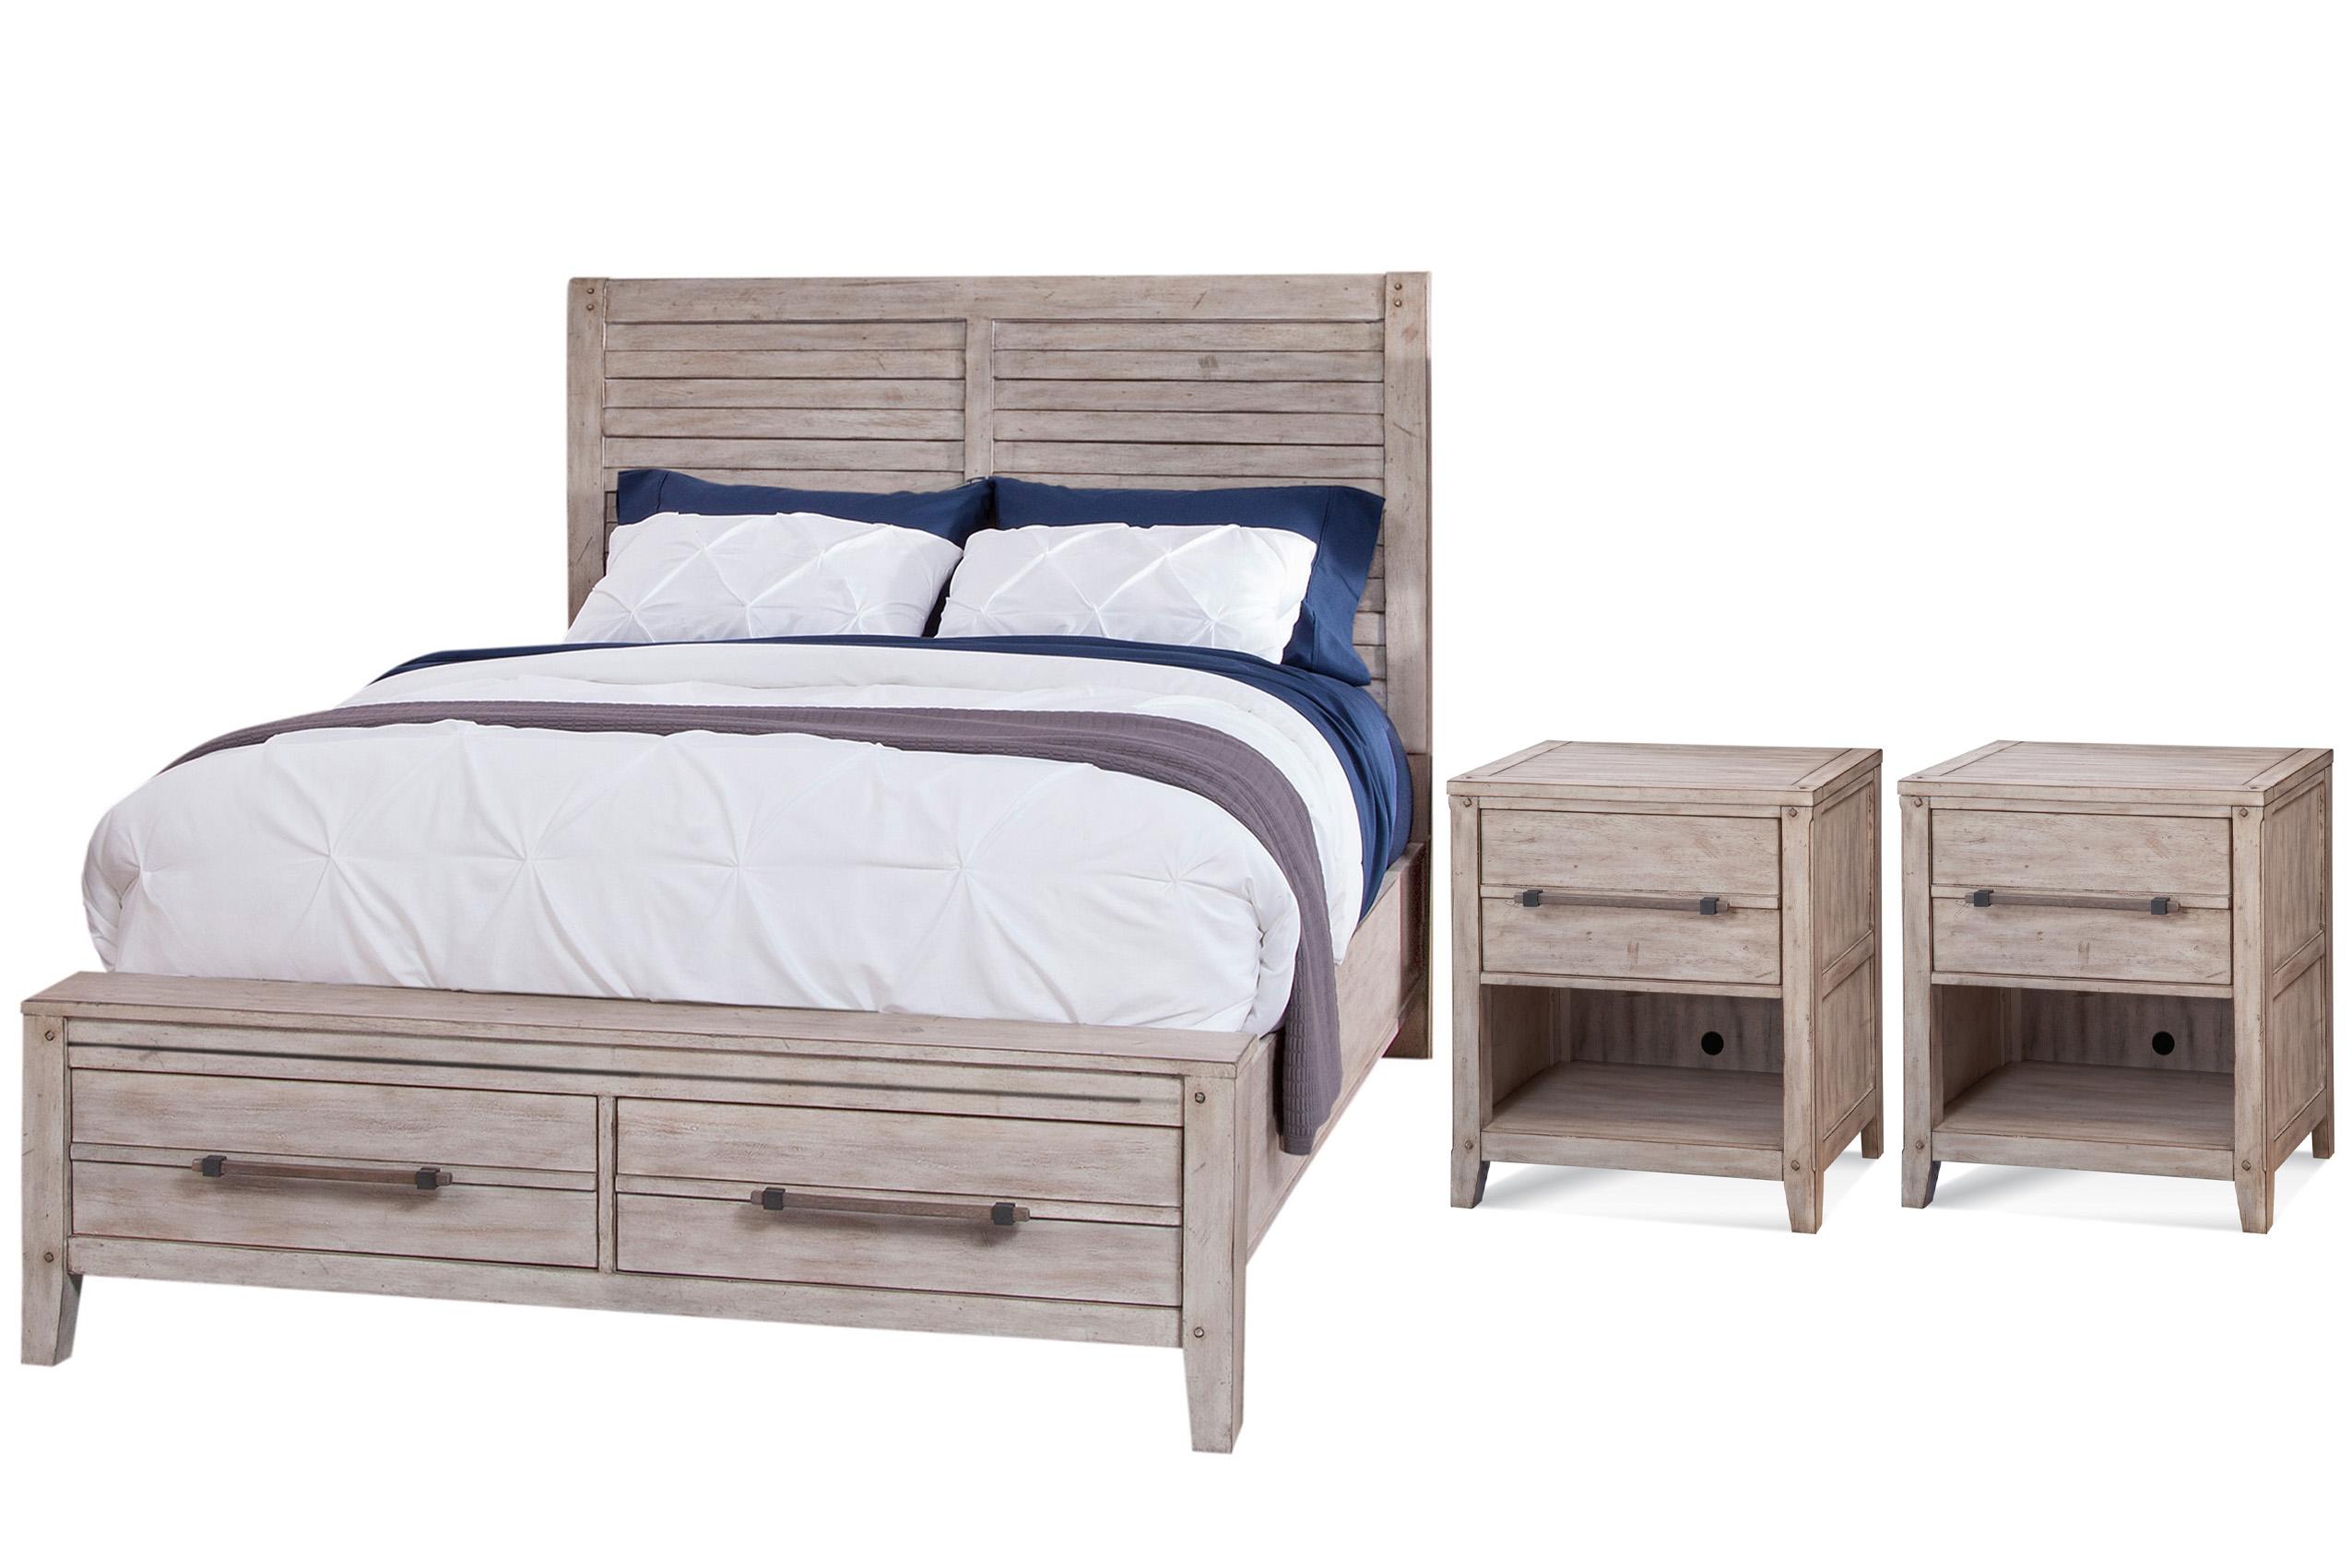 Classic, Traditional Panel Bedroom Set AURORA 2810-50PSB 2810-50PSB-2810-410-2N-3PC in whitewash 